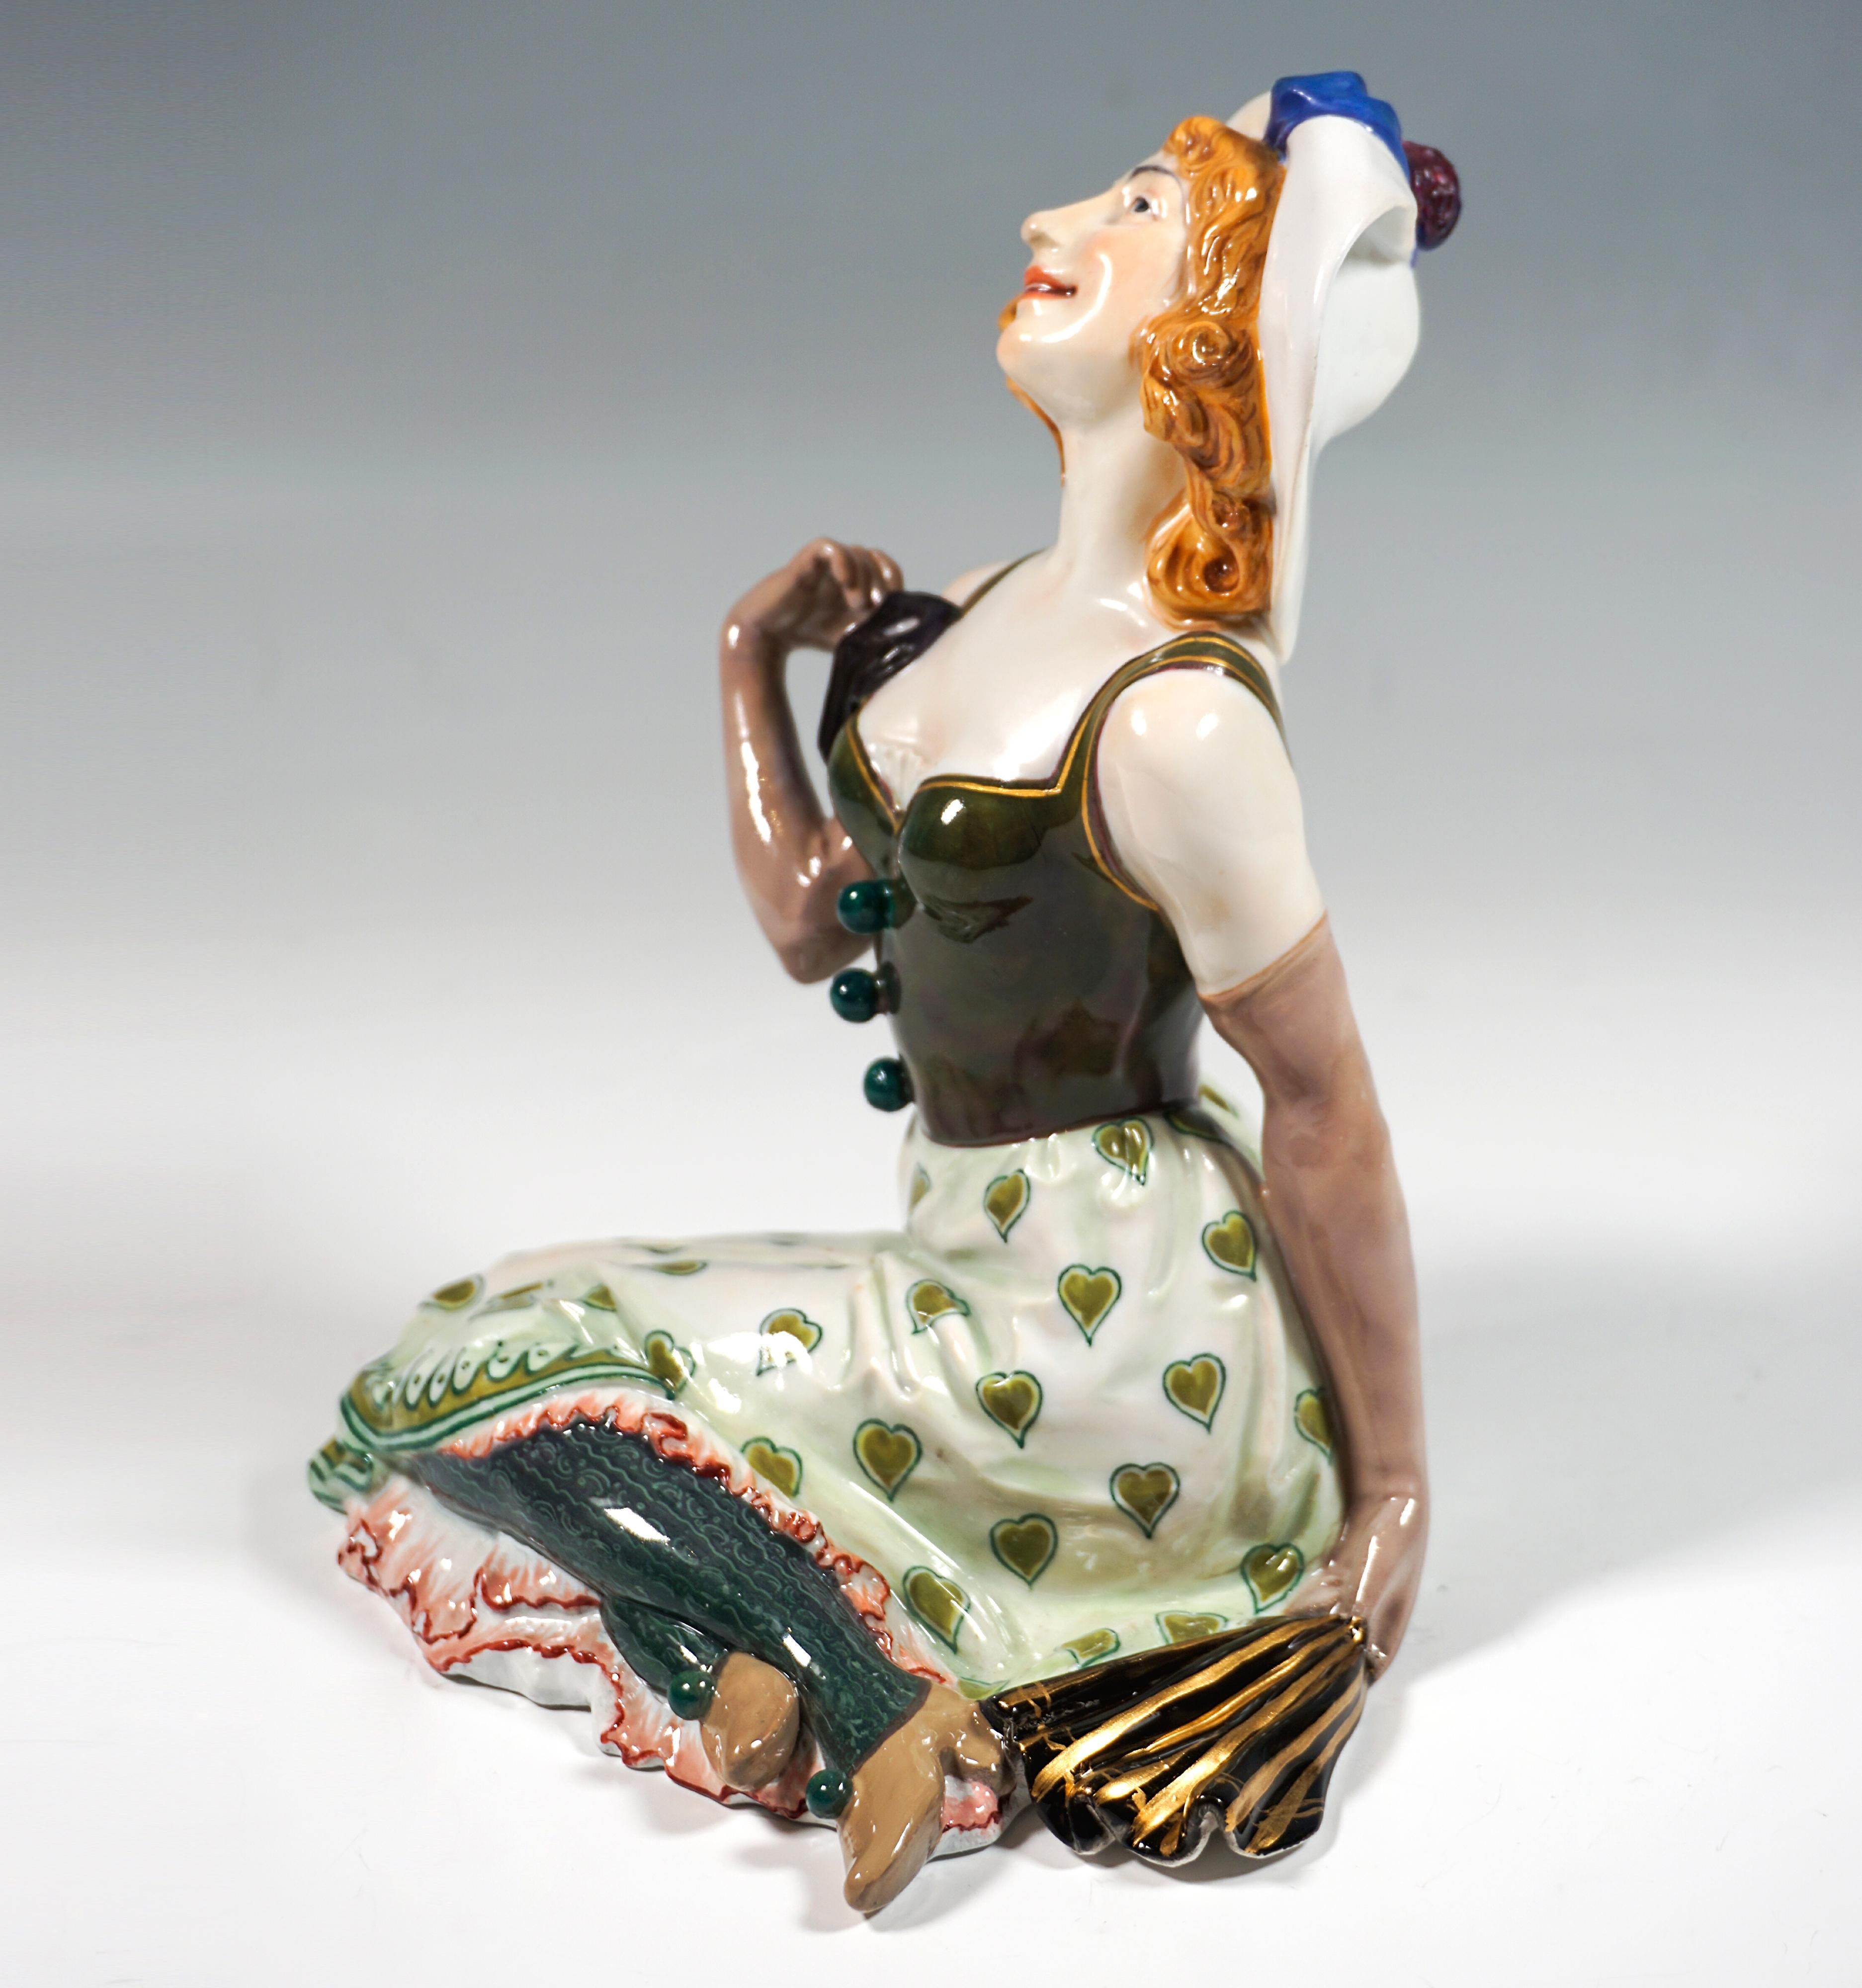 Hand-Crafted Art Nouveau Figurine 'Pierrette' by Martin Wiegand, Meissen Germany, ca 1908 For Sale